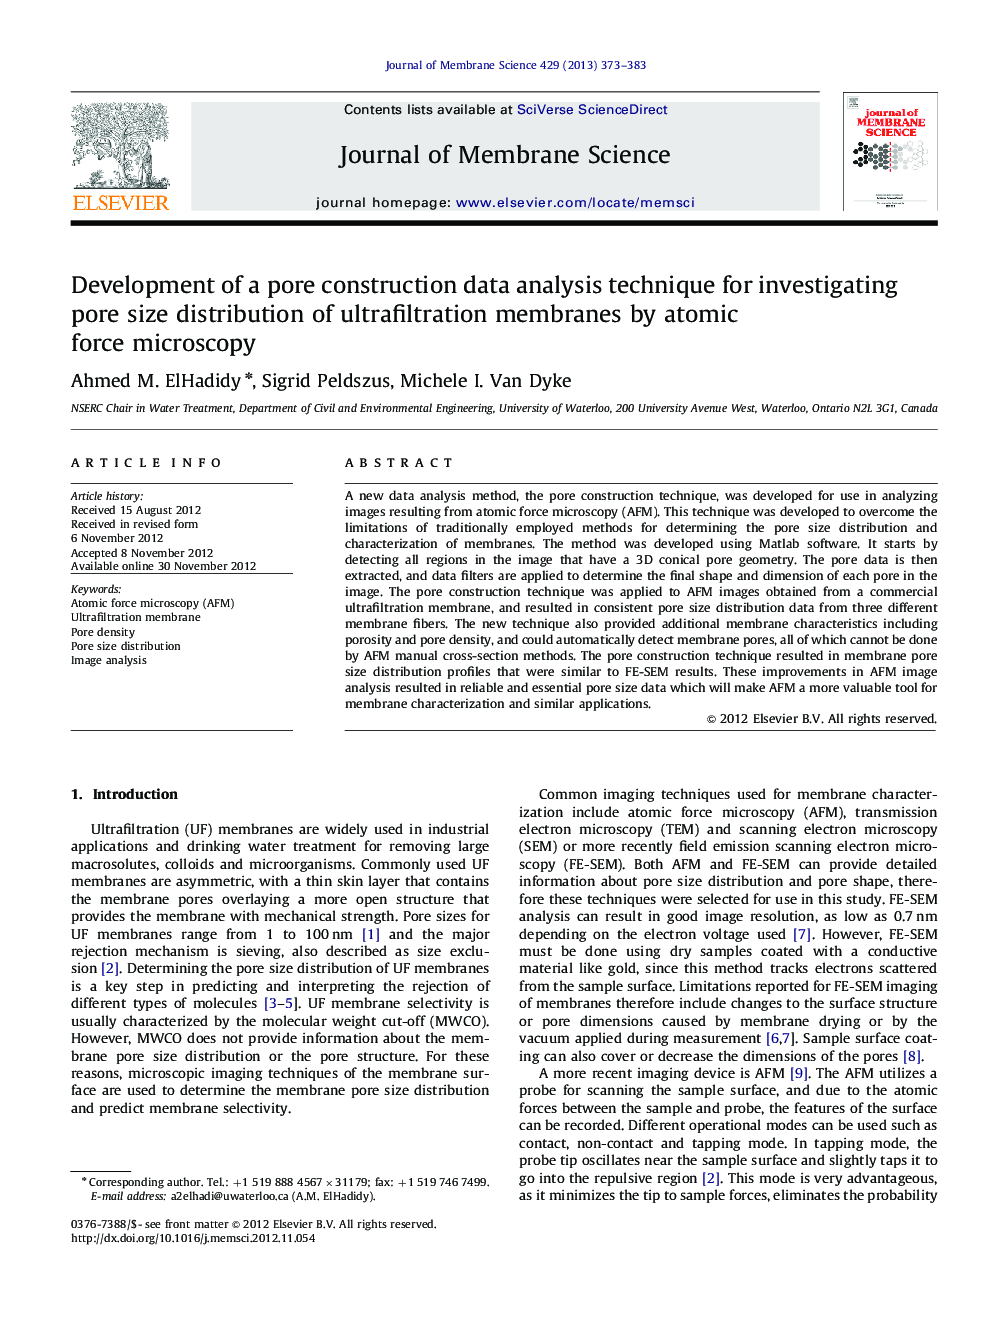 Development of a pore construction data analysis technique for investigating pore size distribution of ultrafiltration membranes by atomic force microscopy